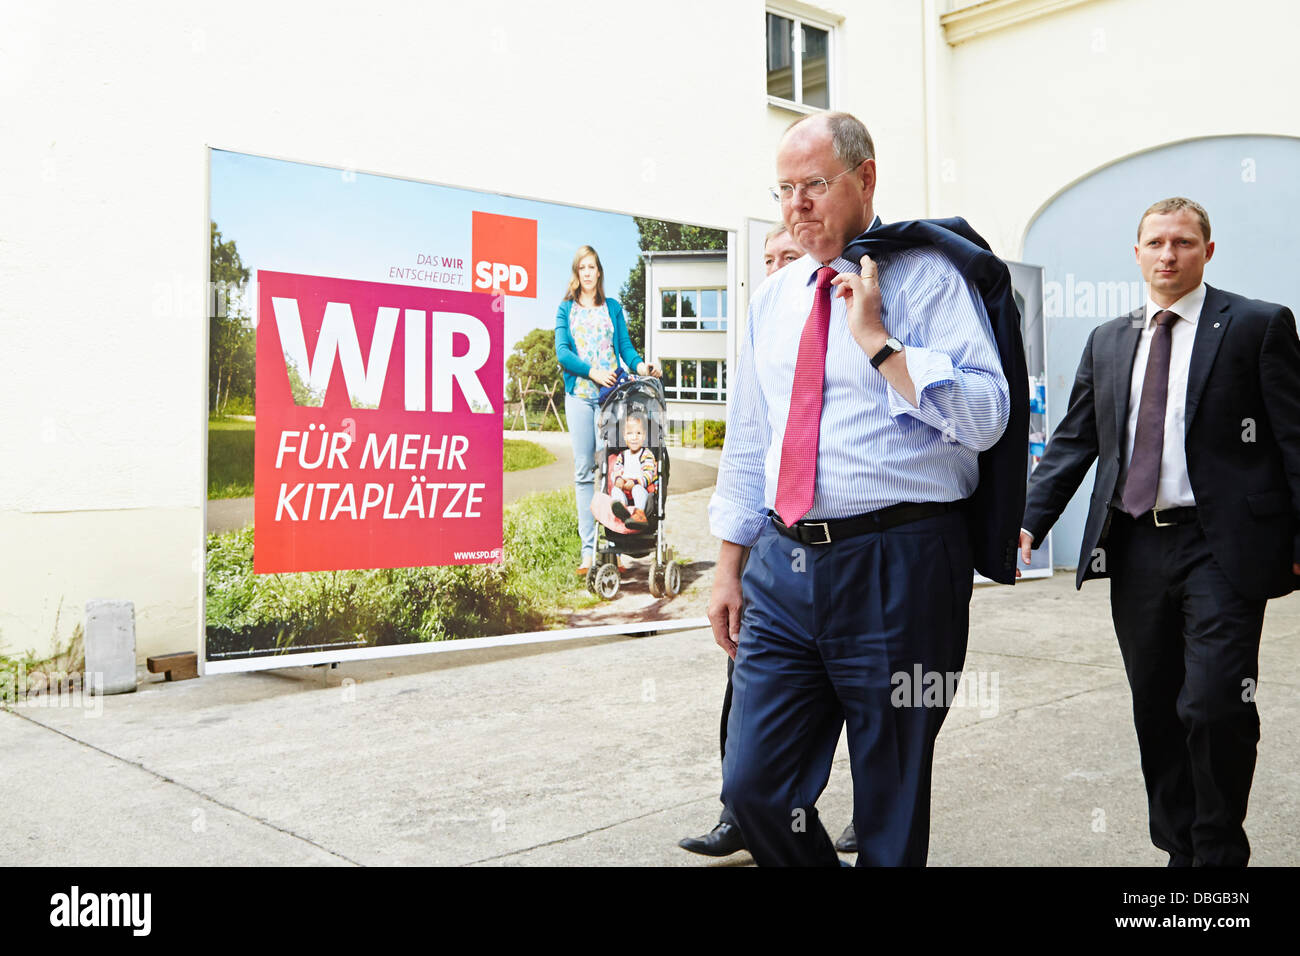 Berlin, Germany. 30 July, 2013. SPD Chancellor candidate Peer Steinbrück and SPD General Secretary Andrea Nahles have introduced the important parts of the SPD election campaign for the parliamentary elections in 2013 in Berlin. / Picture: Peer Steinbrueck (SPD), SPD chancellor candidate, leaves the place of the Presentation of the SPD election campaign for German Federal Parliament election 2013 in Berlin. Credit:  Reynaldo Chaib Paganelli/Alamy Live News Stock Photo